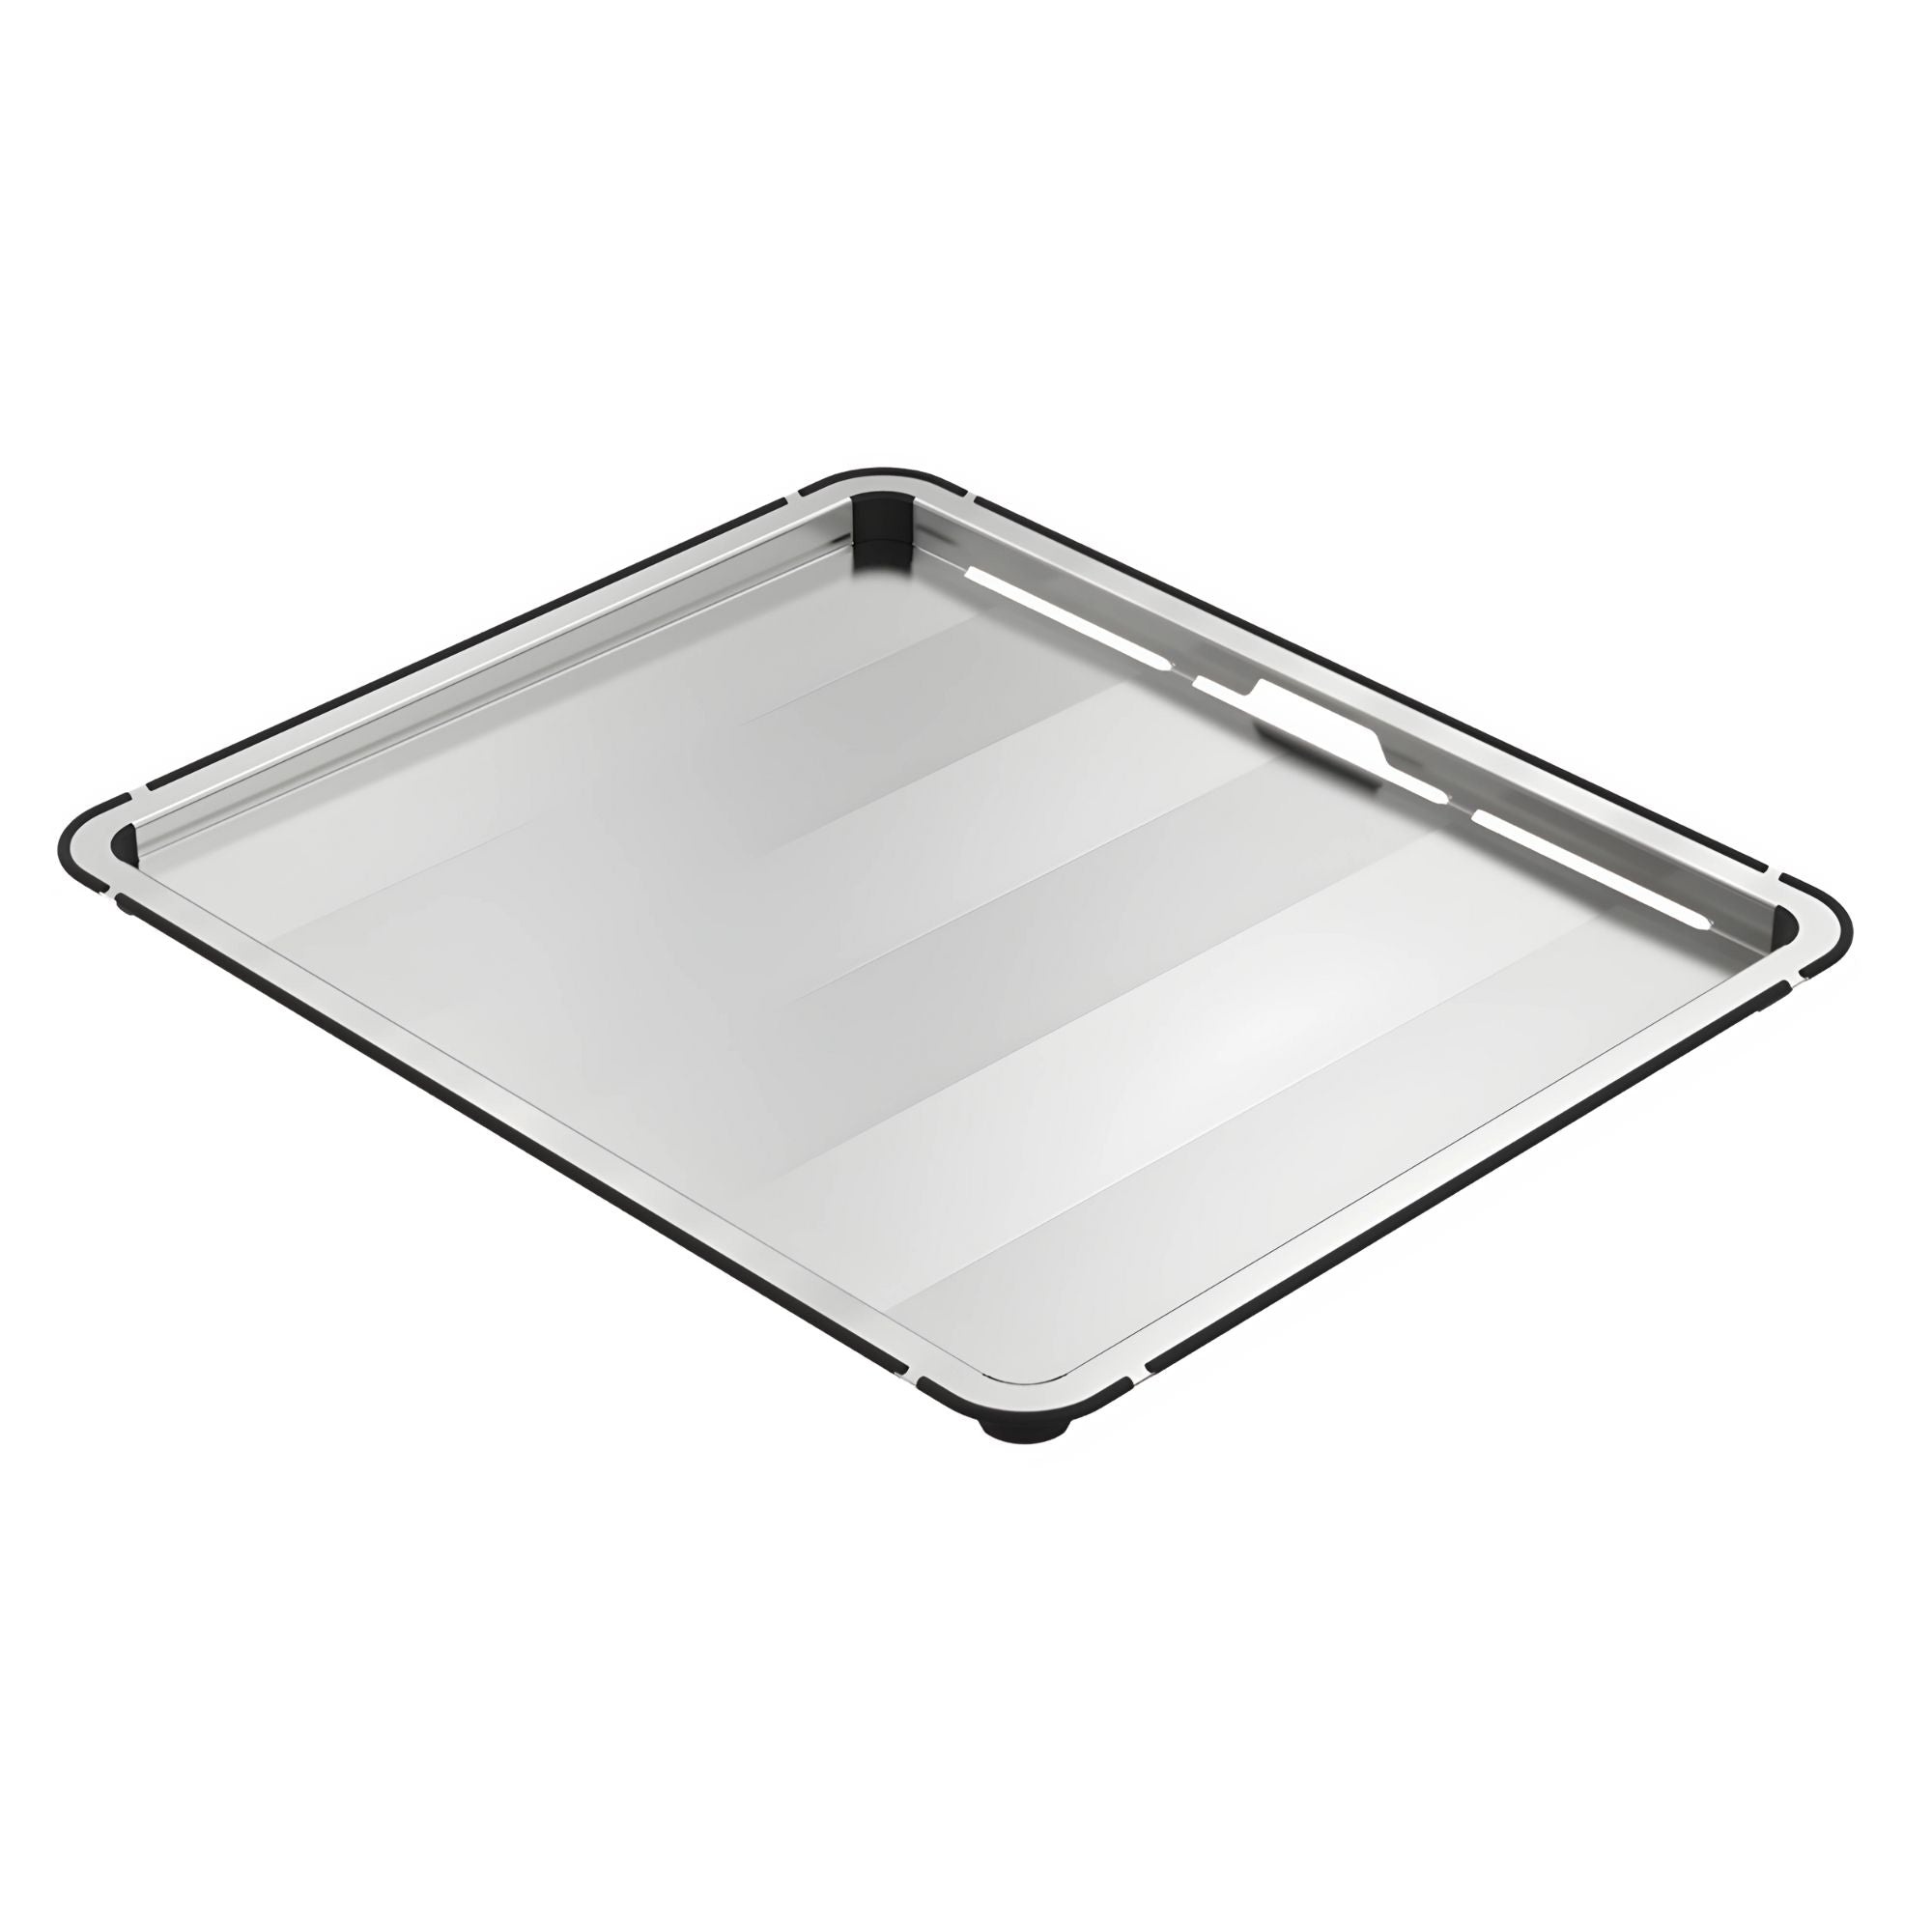 ABEY PIAZZA 1 & 3/4 DOUBLE BOWL KITCHEN SINK STAINLESS STEEL 889MM